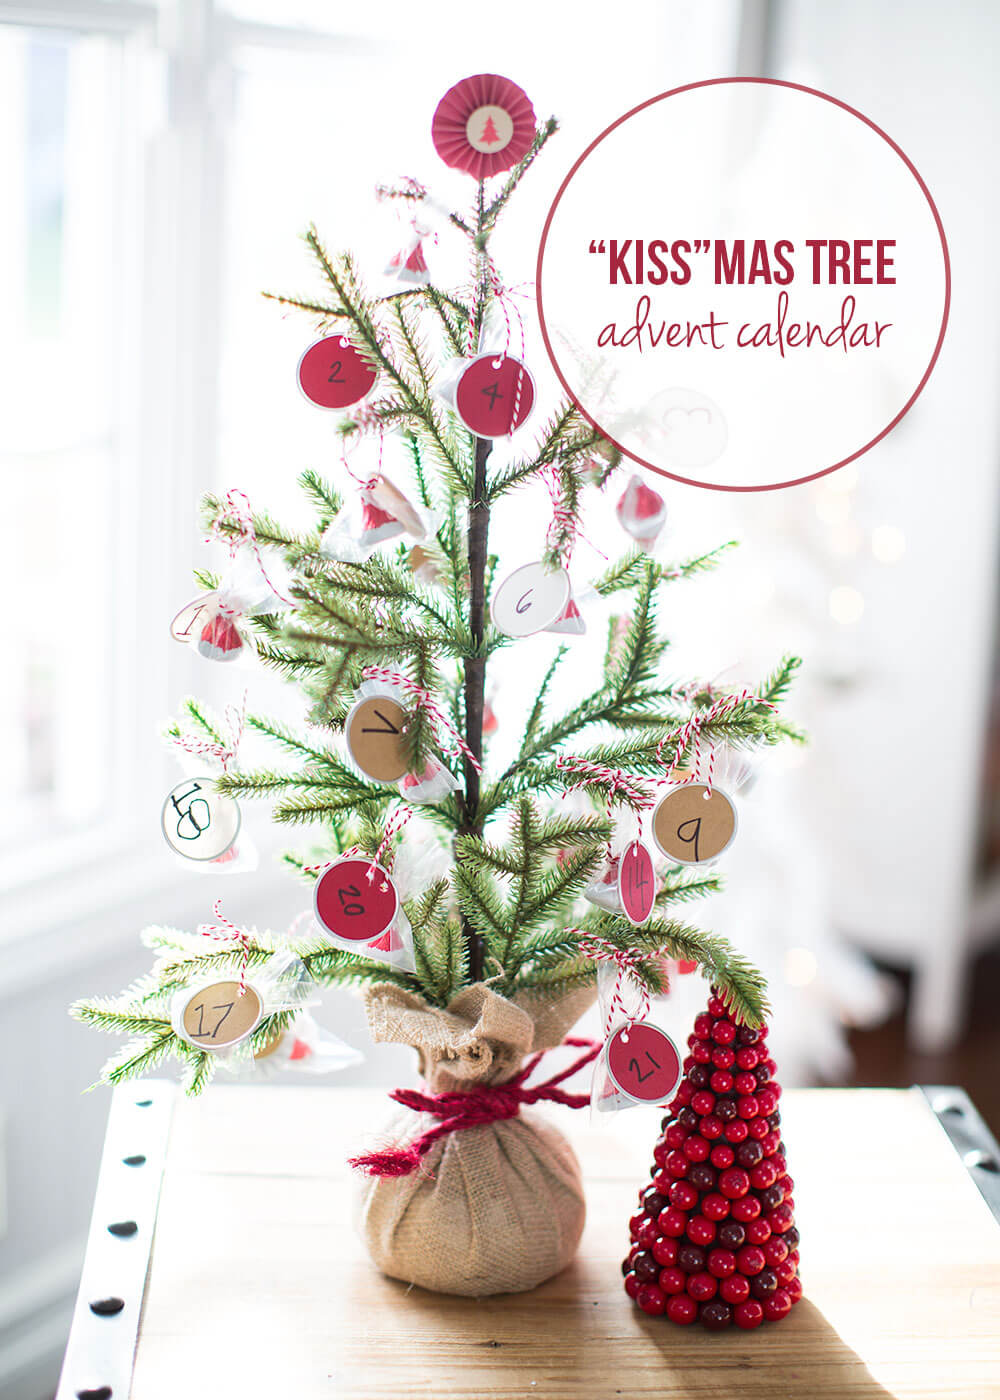 KISSmas tree advent calendar - a fun and easy way for the kids to count down to Christmas!